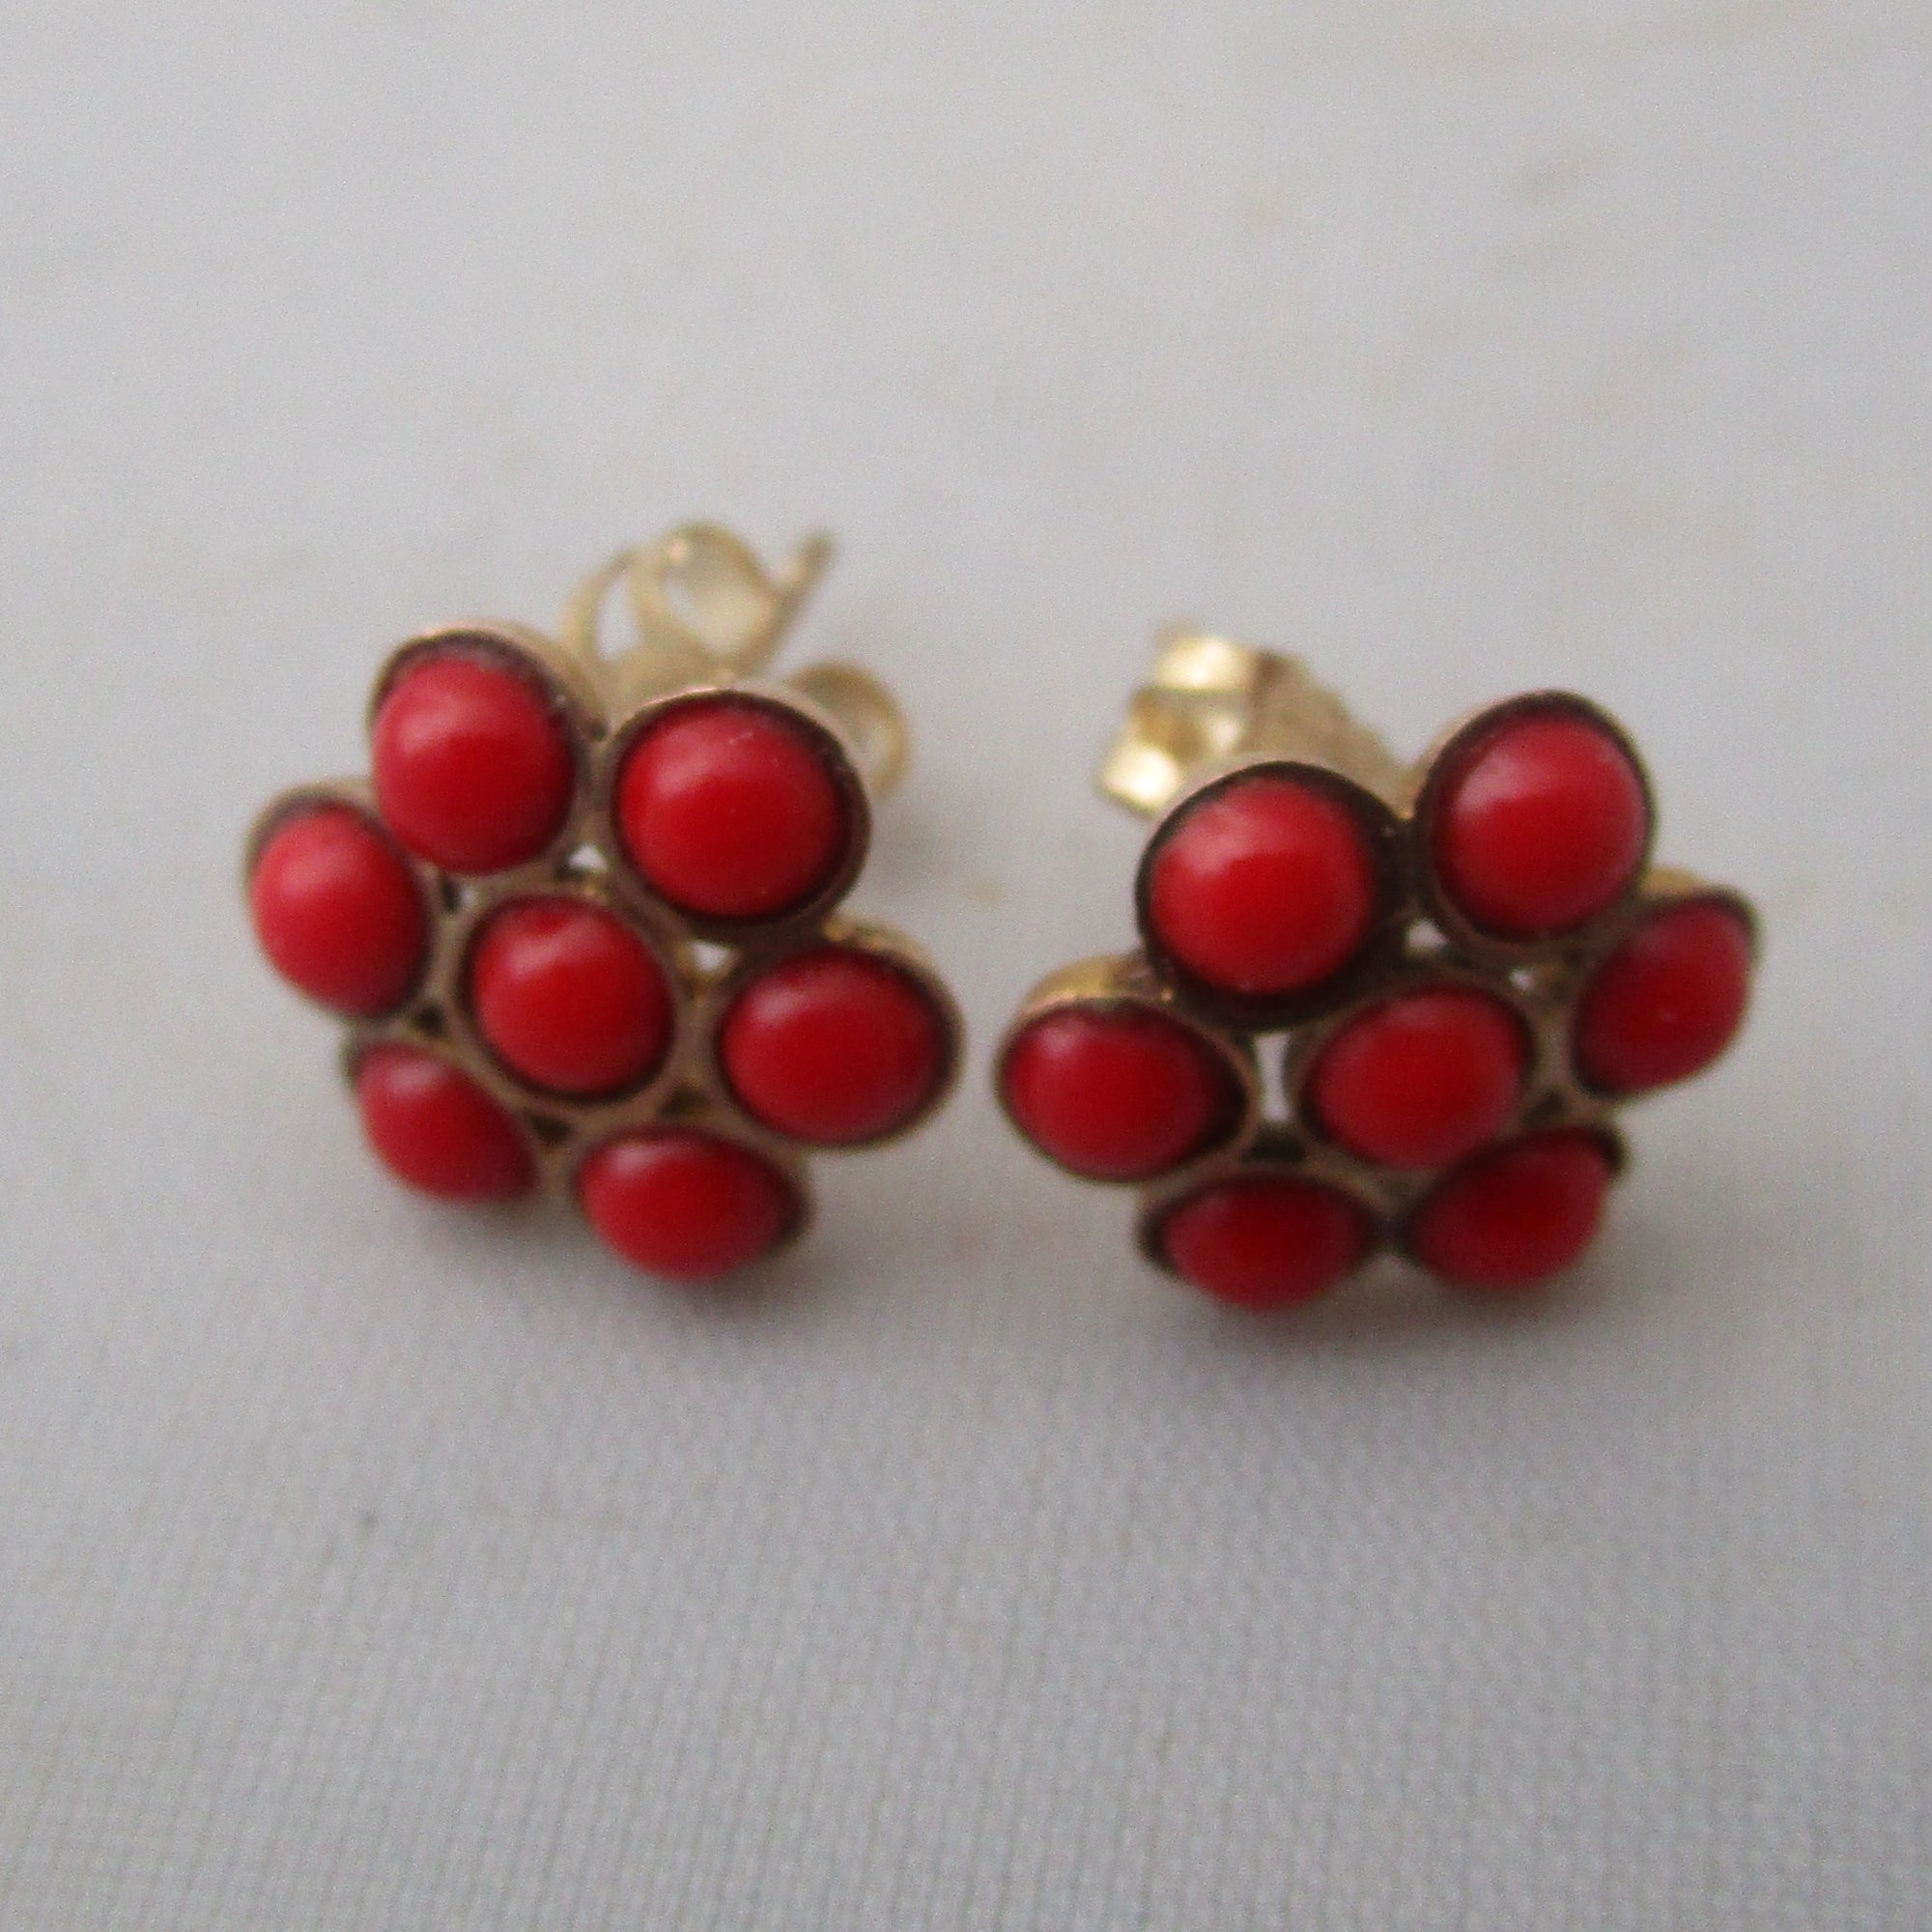 9K Gold And Coral Floral Cluster Stud Earrings Vintage c1980